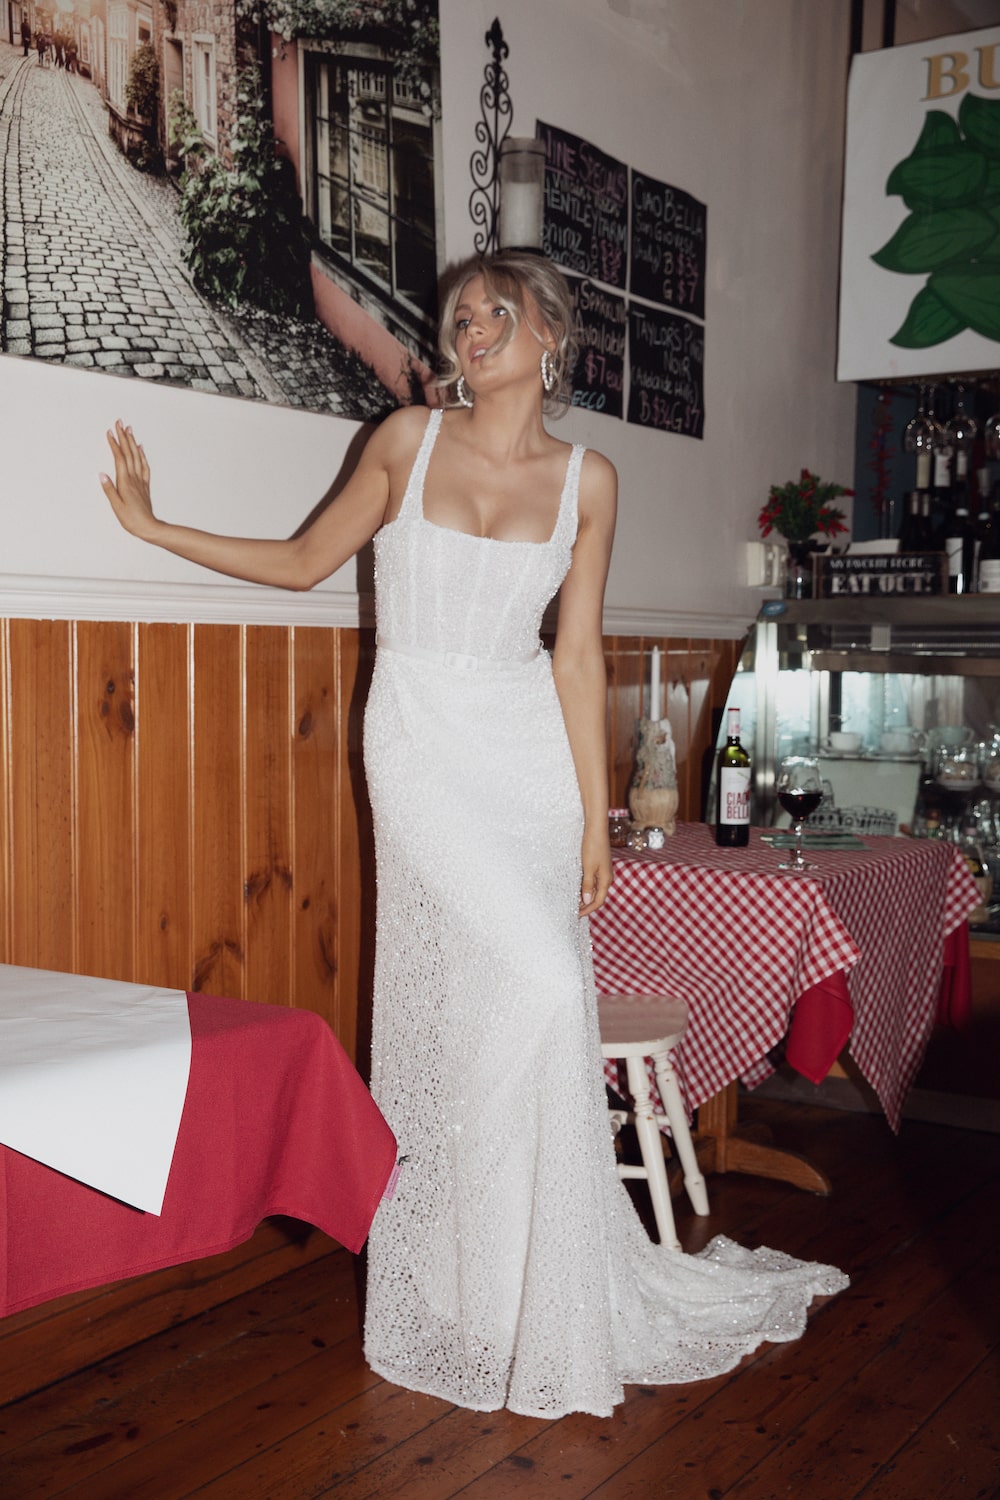 Model posing against wall in Italian cafe wearing the Ornella gown.